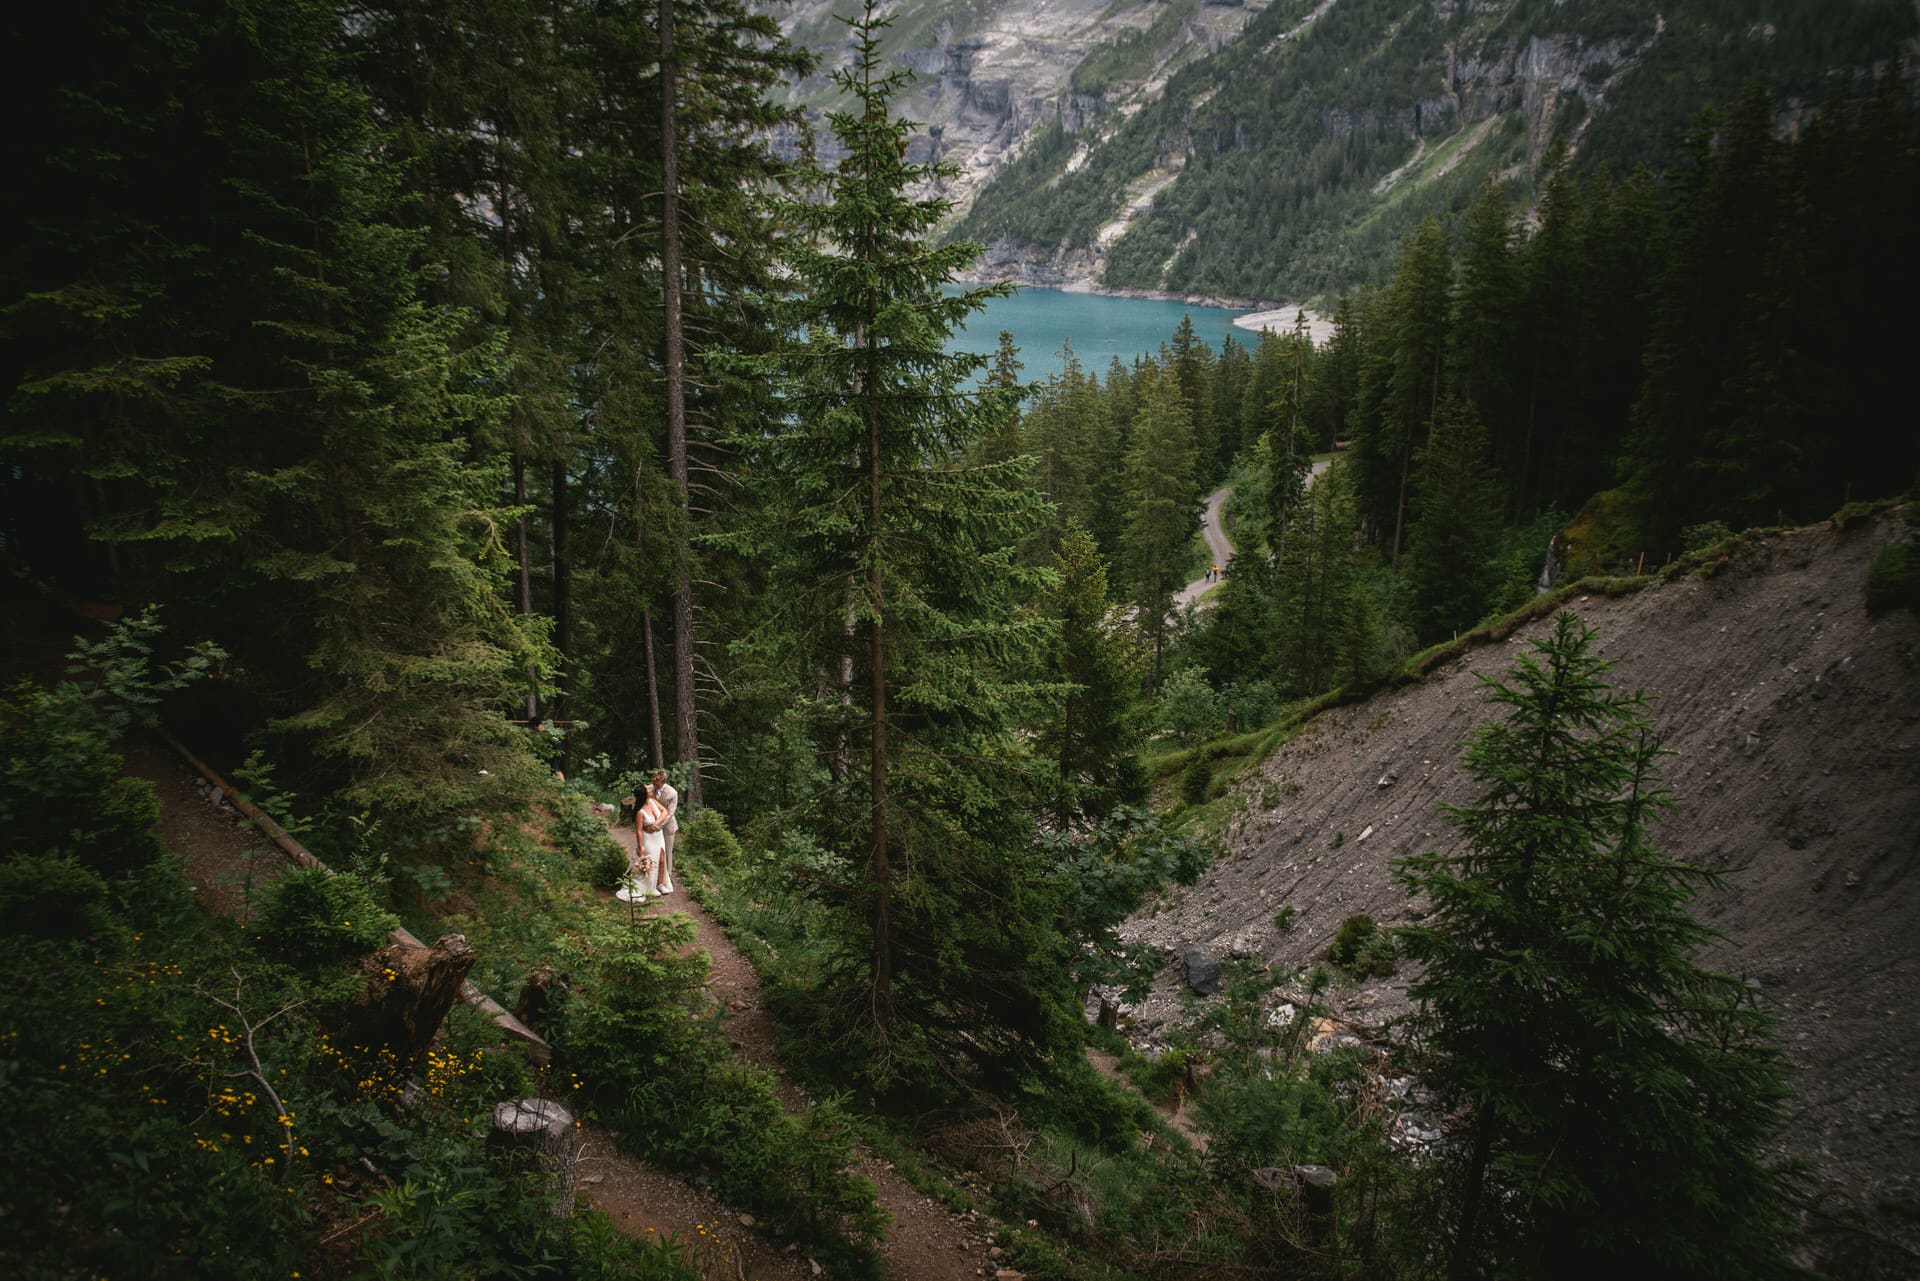 Peaks whispered their promises - hiking elopement in Switzerland.